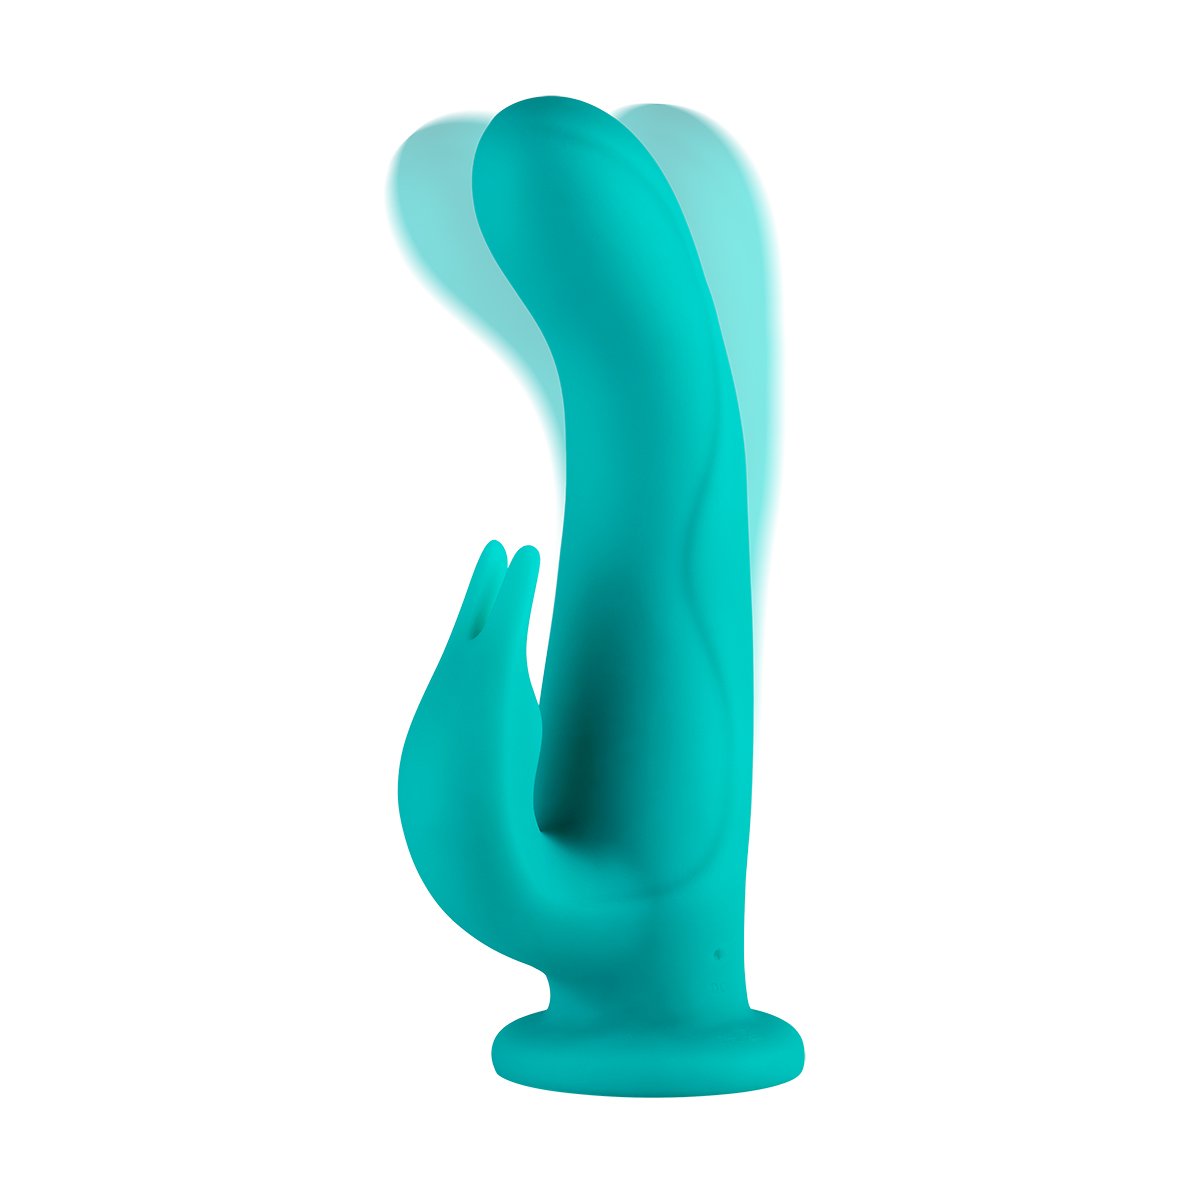 Femme Funn Pirouette Aqua - Buy At Luxury Toy X - Free 3-Day Shipping